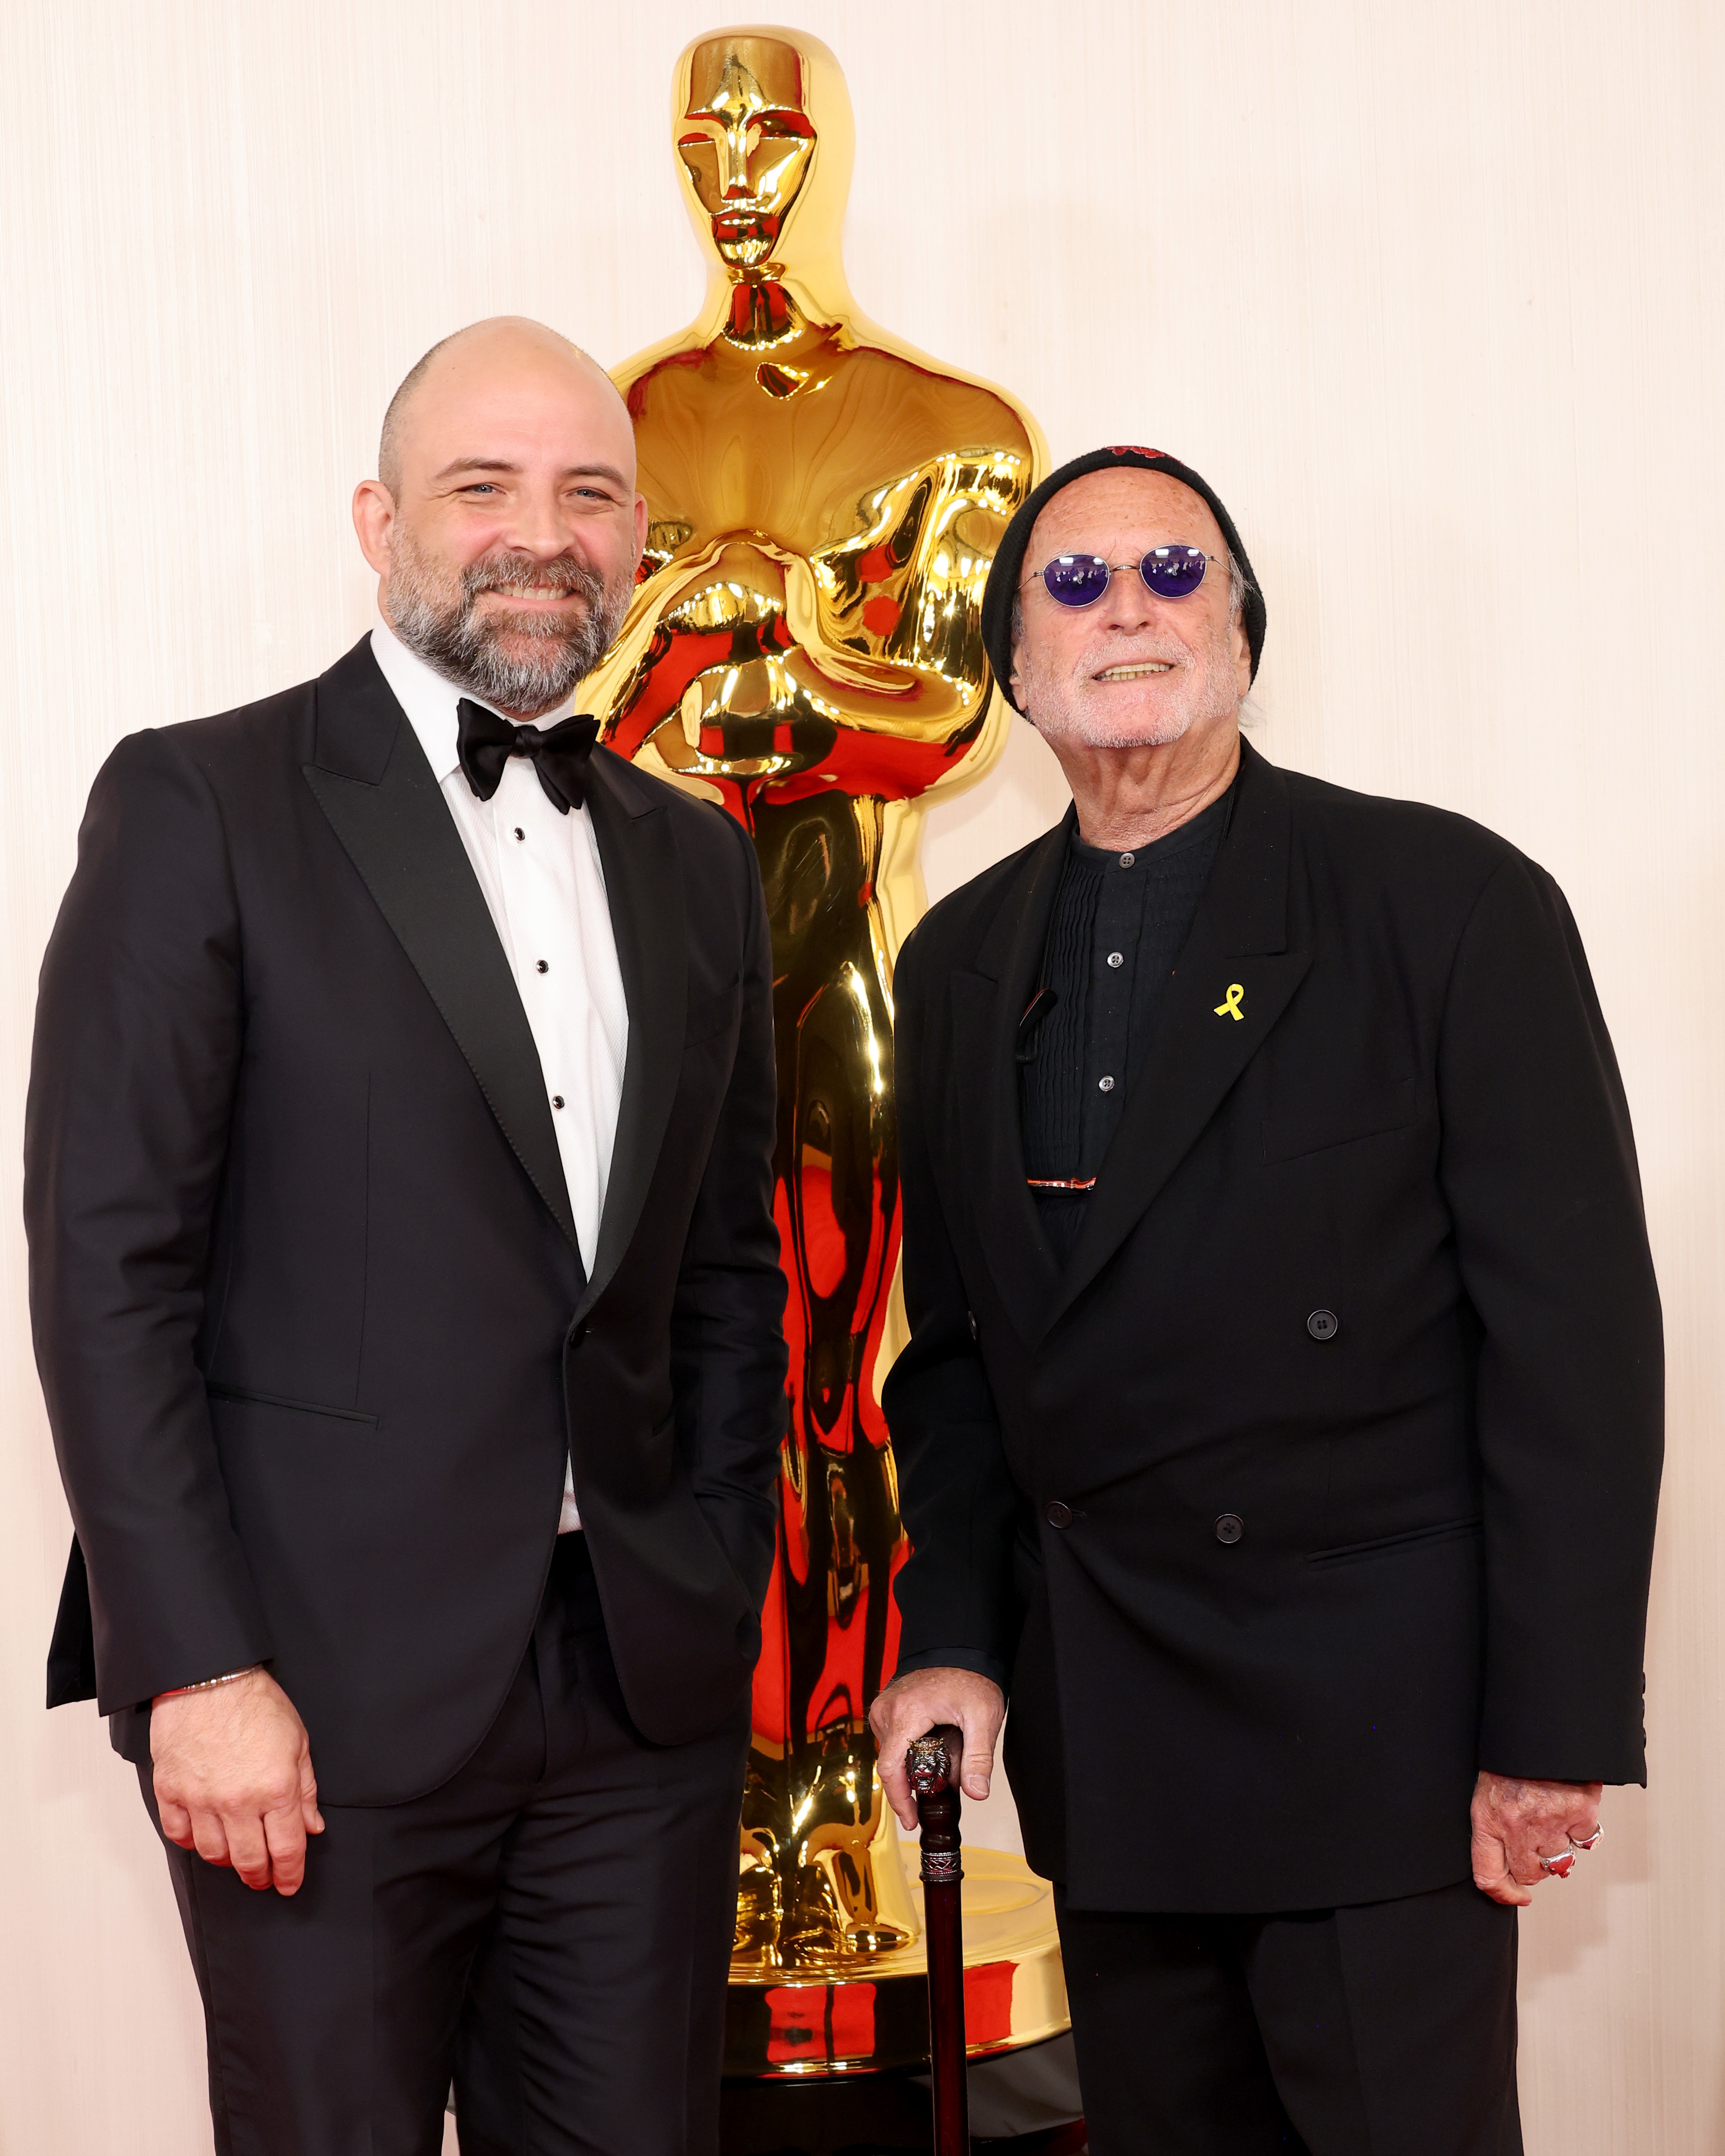 Avi Arad and another gentleman at the Oscars